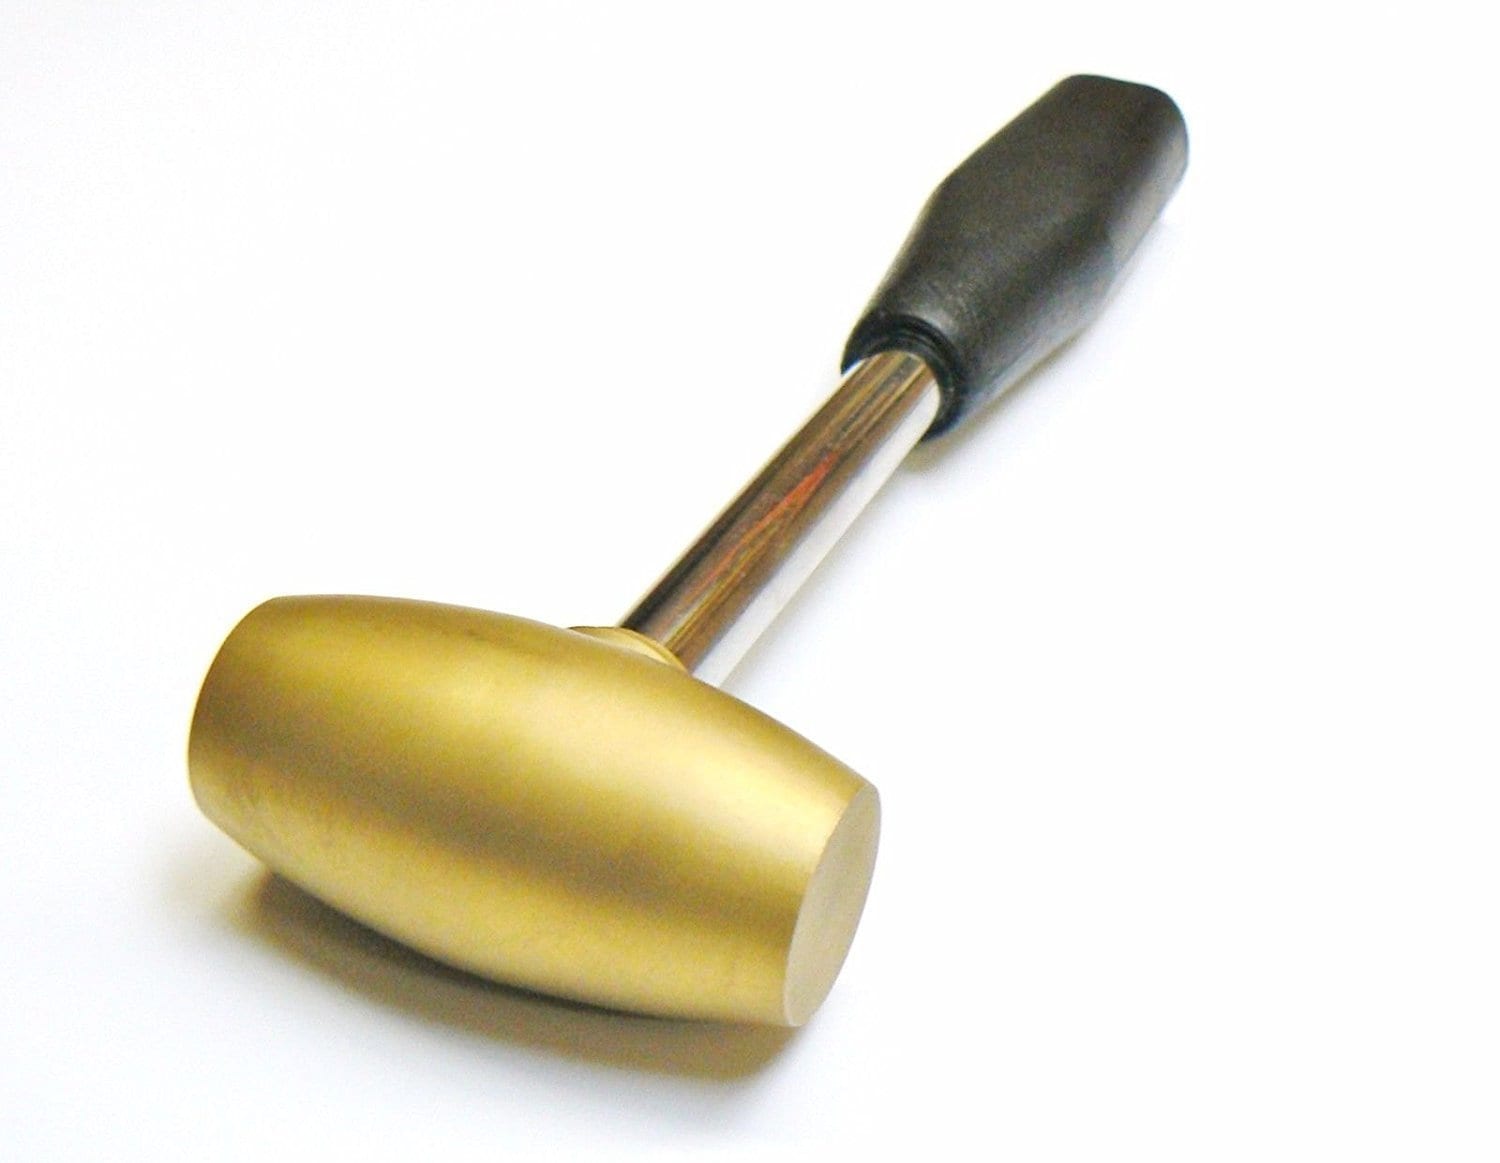 Rawhide Leather Mallet 1 Face 2 Oz Jewelry Making Tool Hammer Snaps Rivets  Leather Hobby Craft Leather Work HAM-0031 